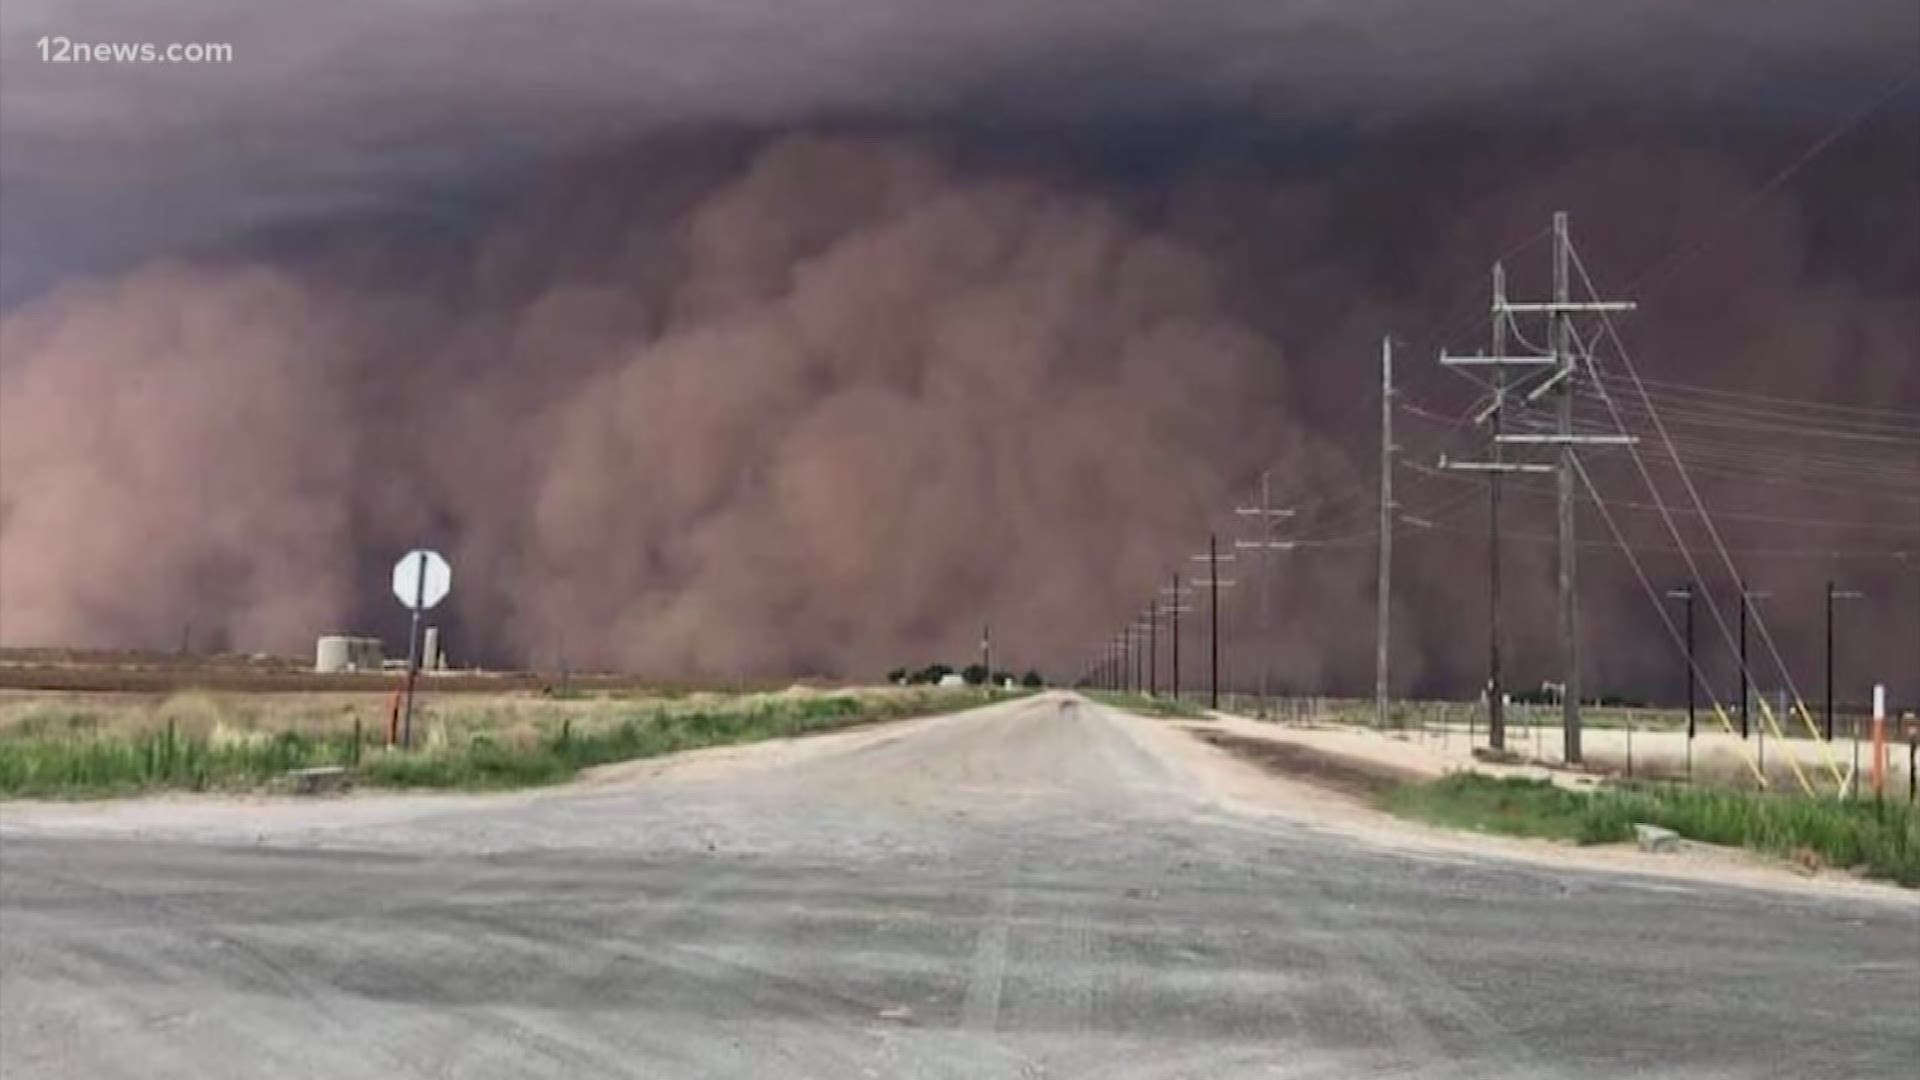 Tower cam video and ground video shows a massive dust storm blow through Lubbock, Texas.